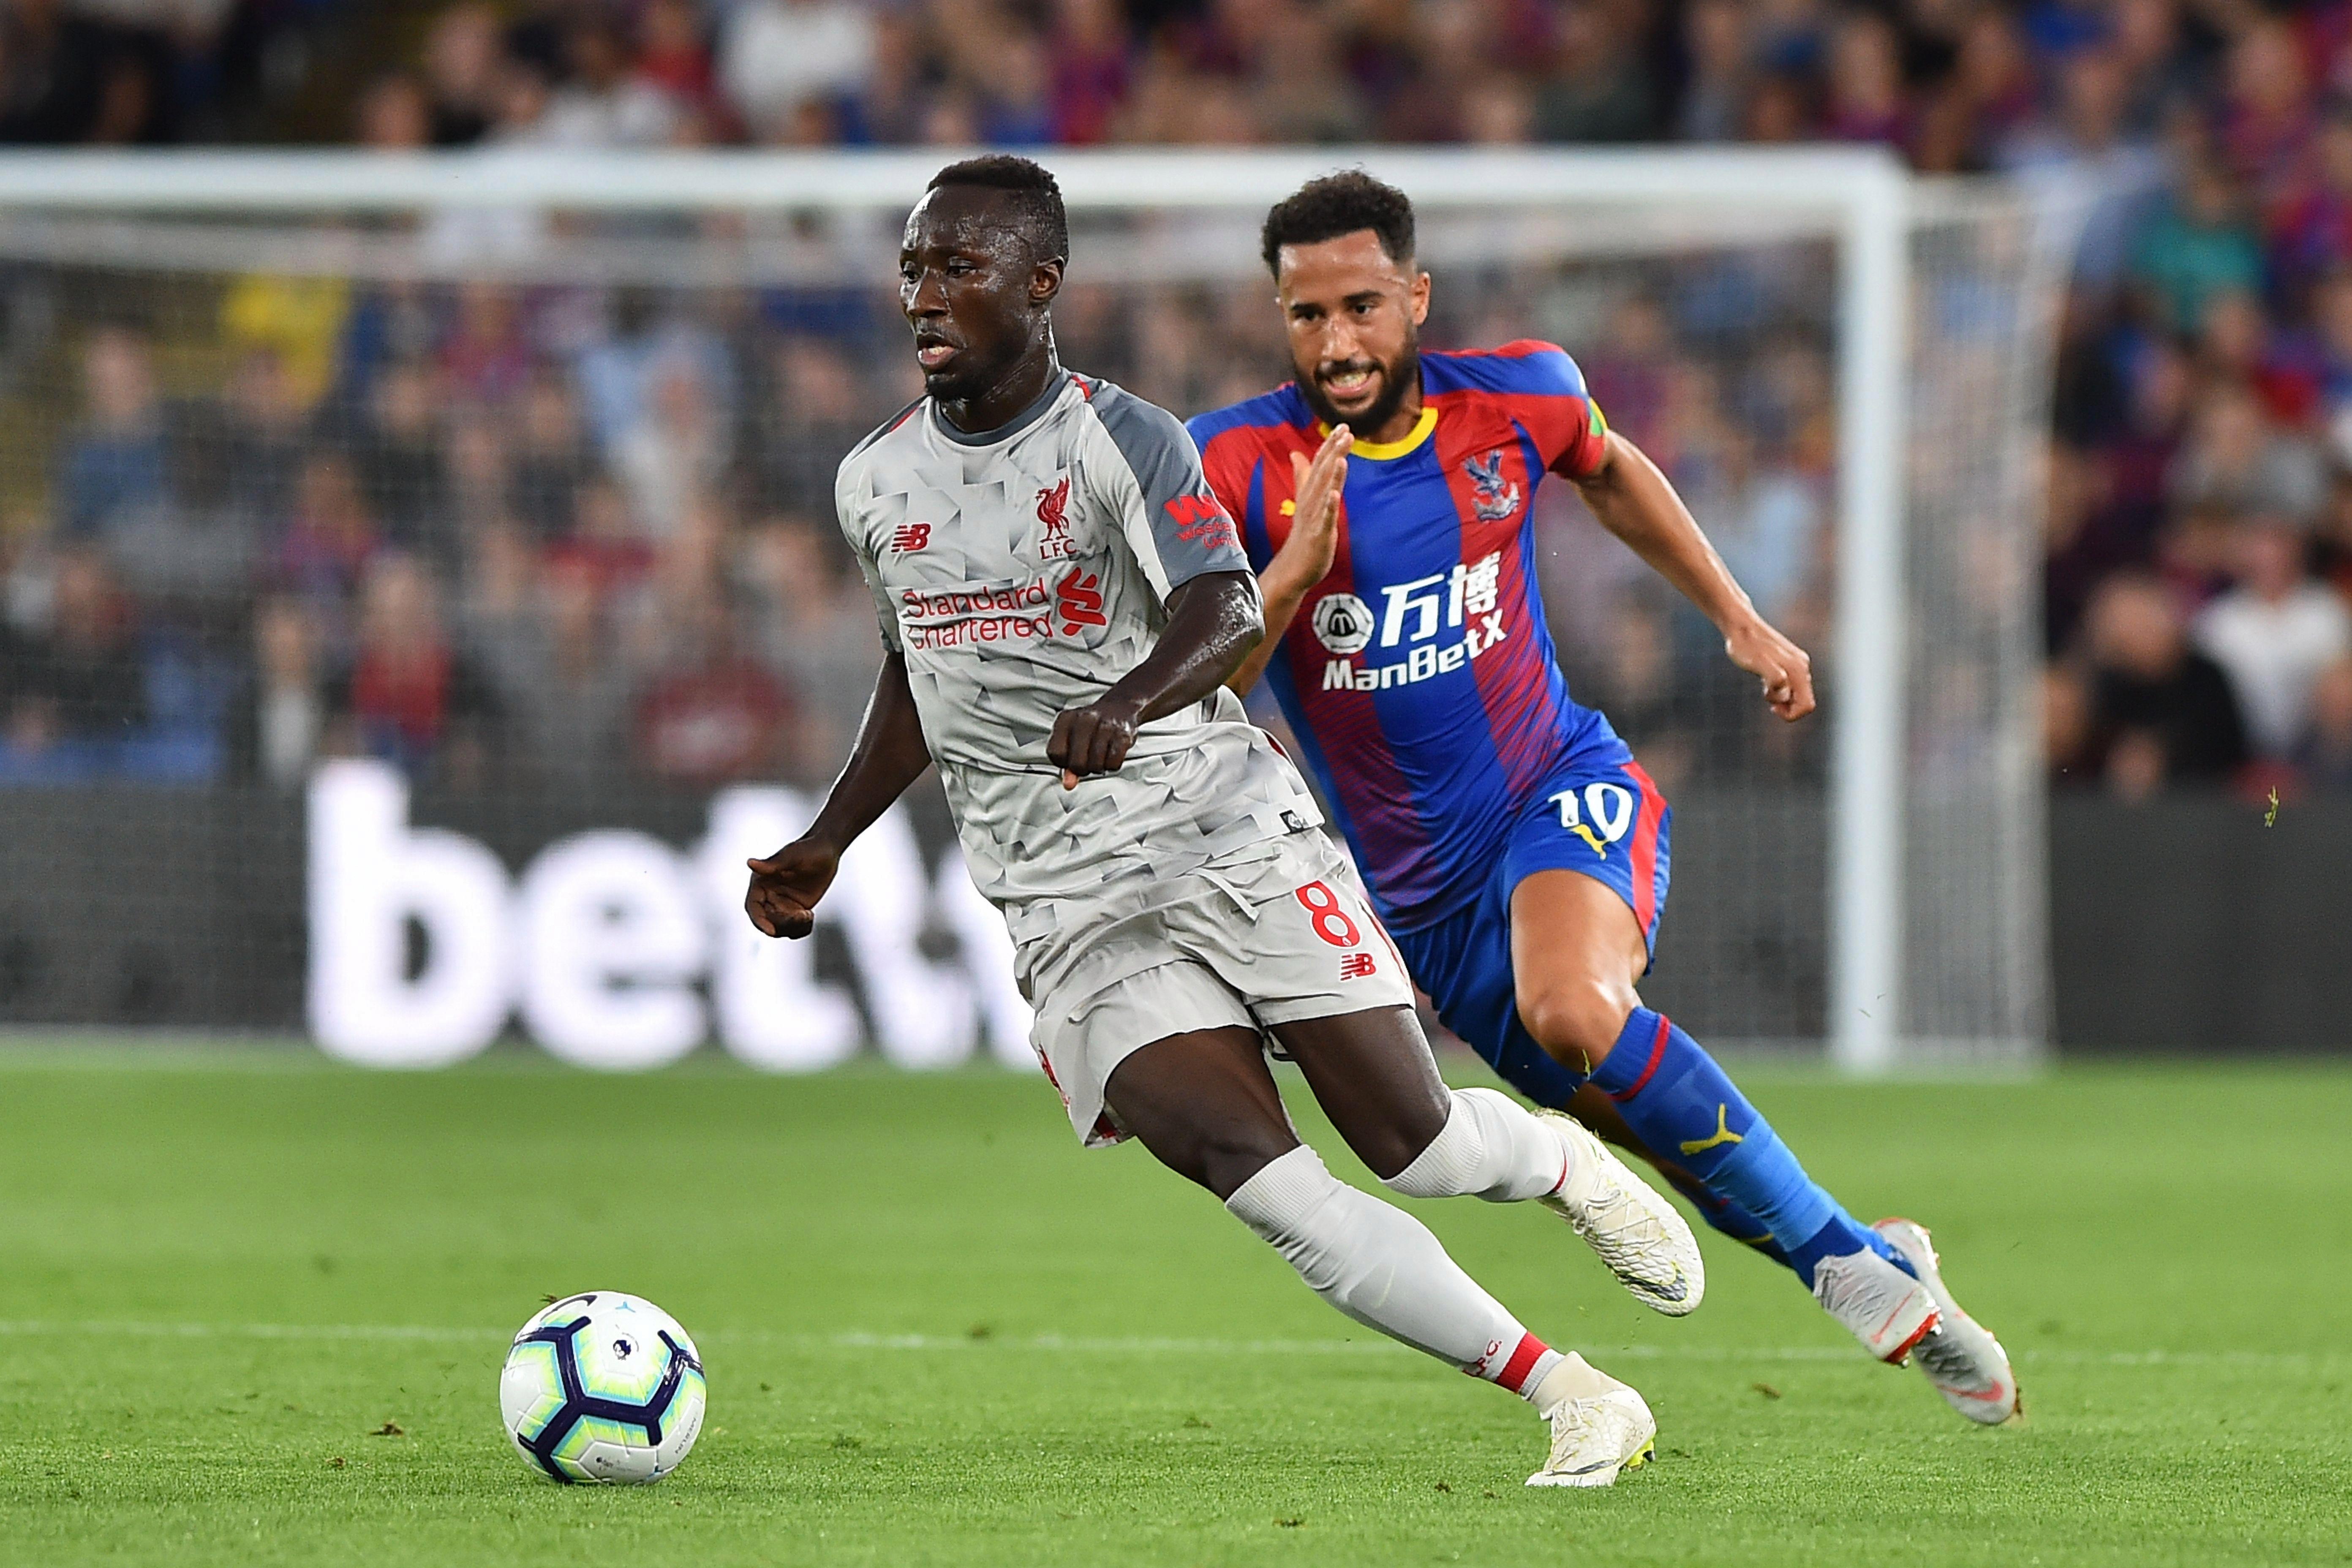 Liverpool fans obsess over Naby Keita's sensational performance at Crystal Palace